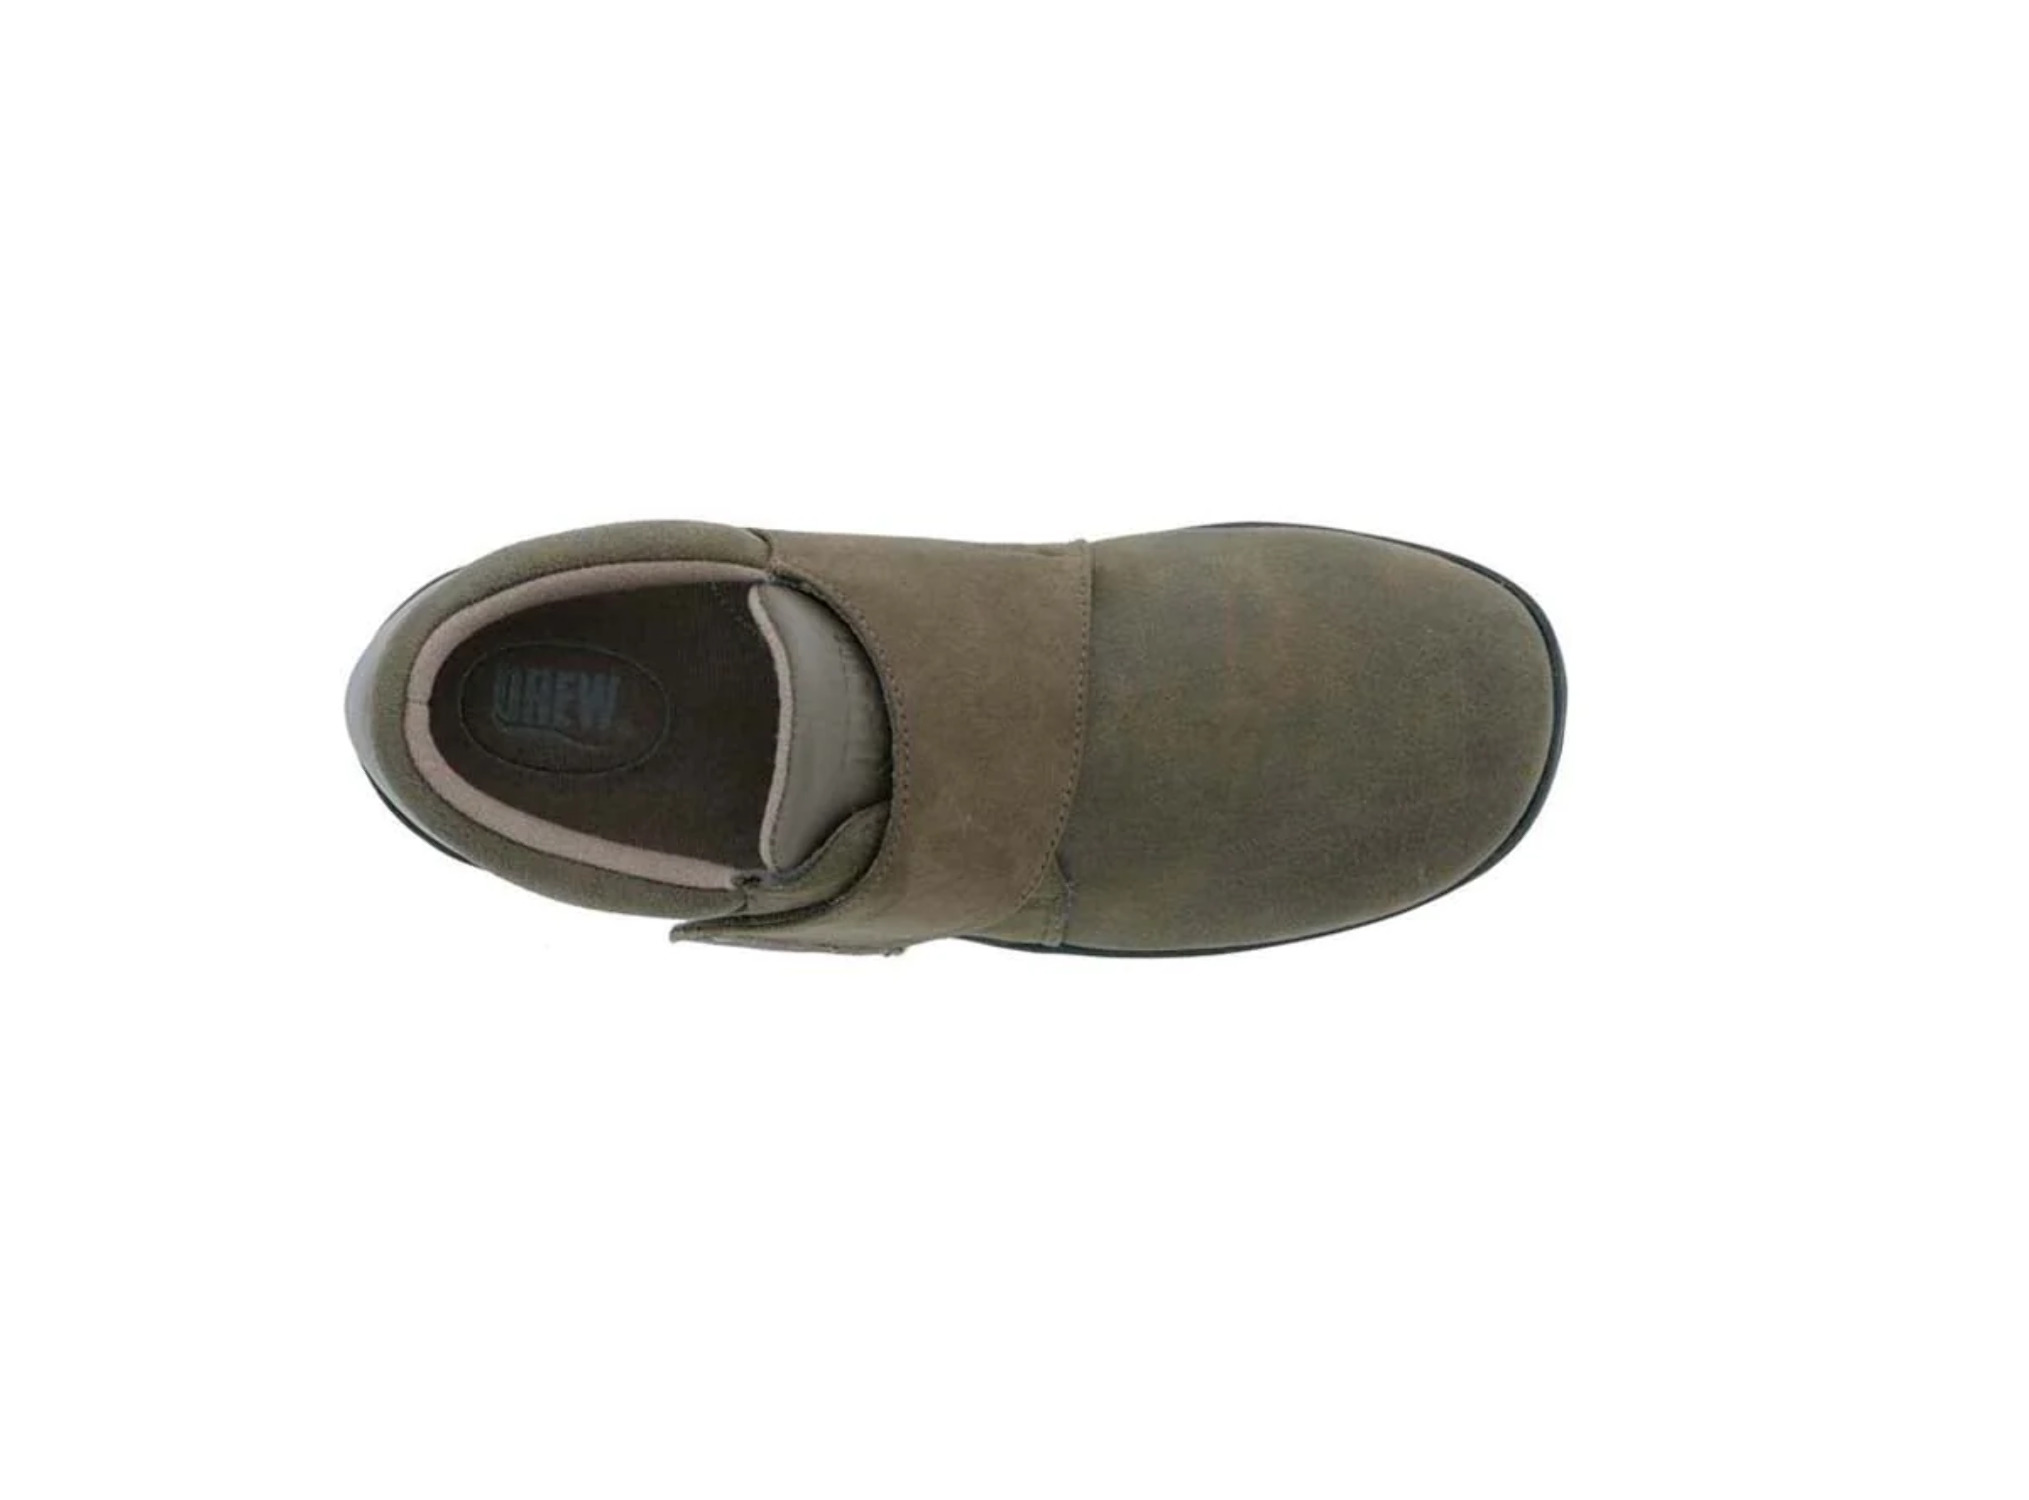 DREW MOONWALK WOMEN CASUAL SHOE IN OLIVE STRETCH LEATHER - image 3 of 4